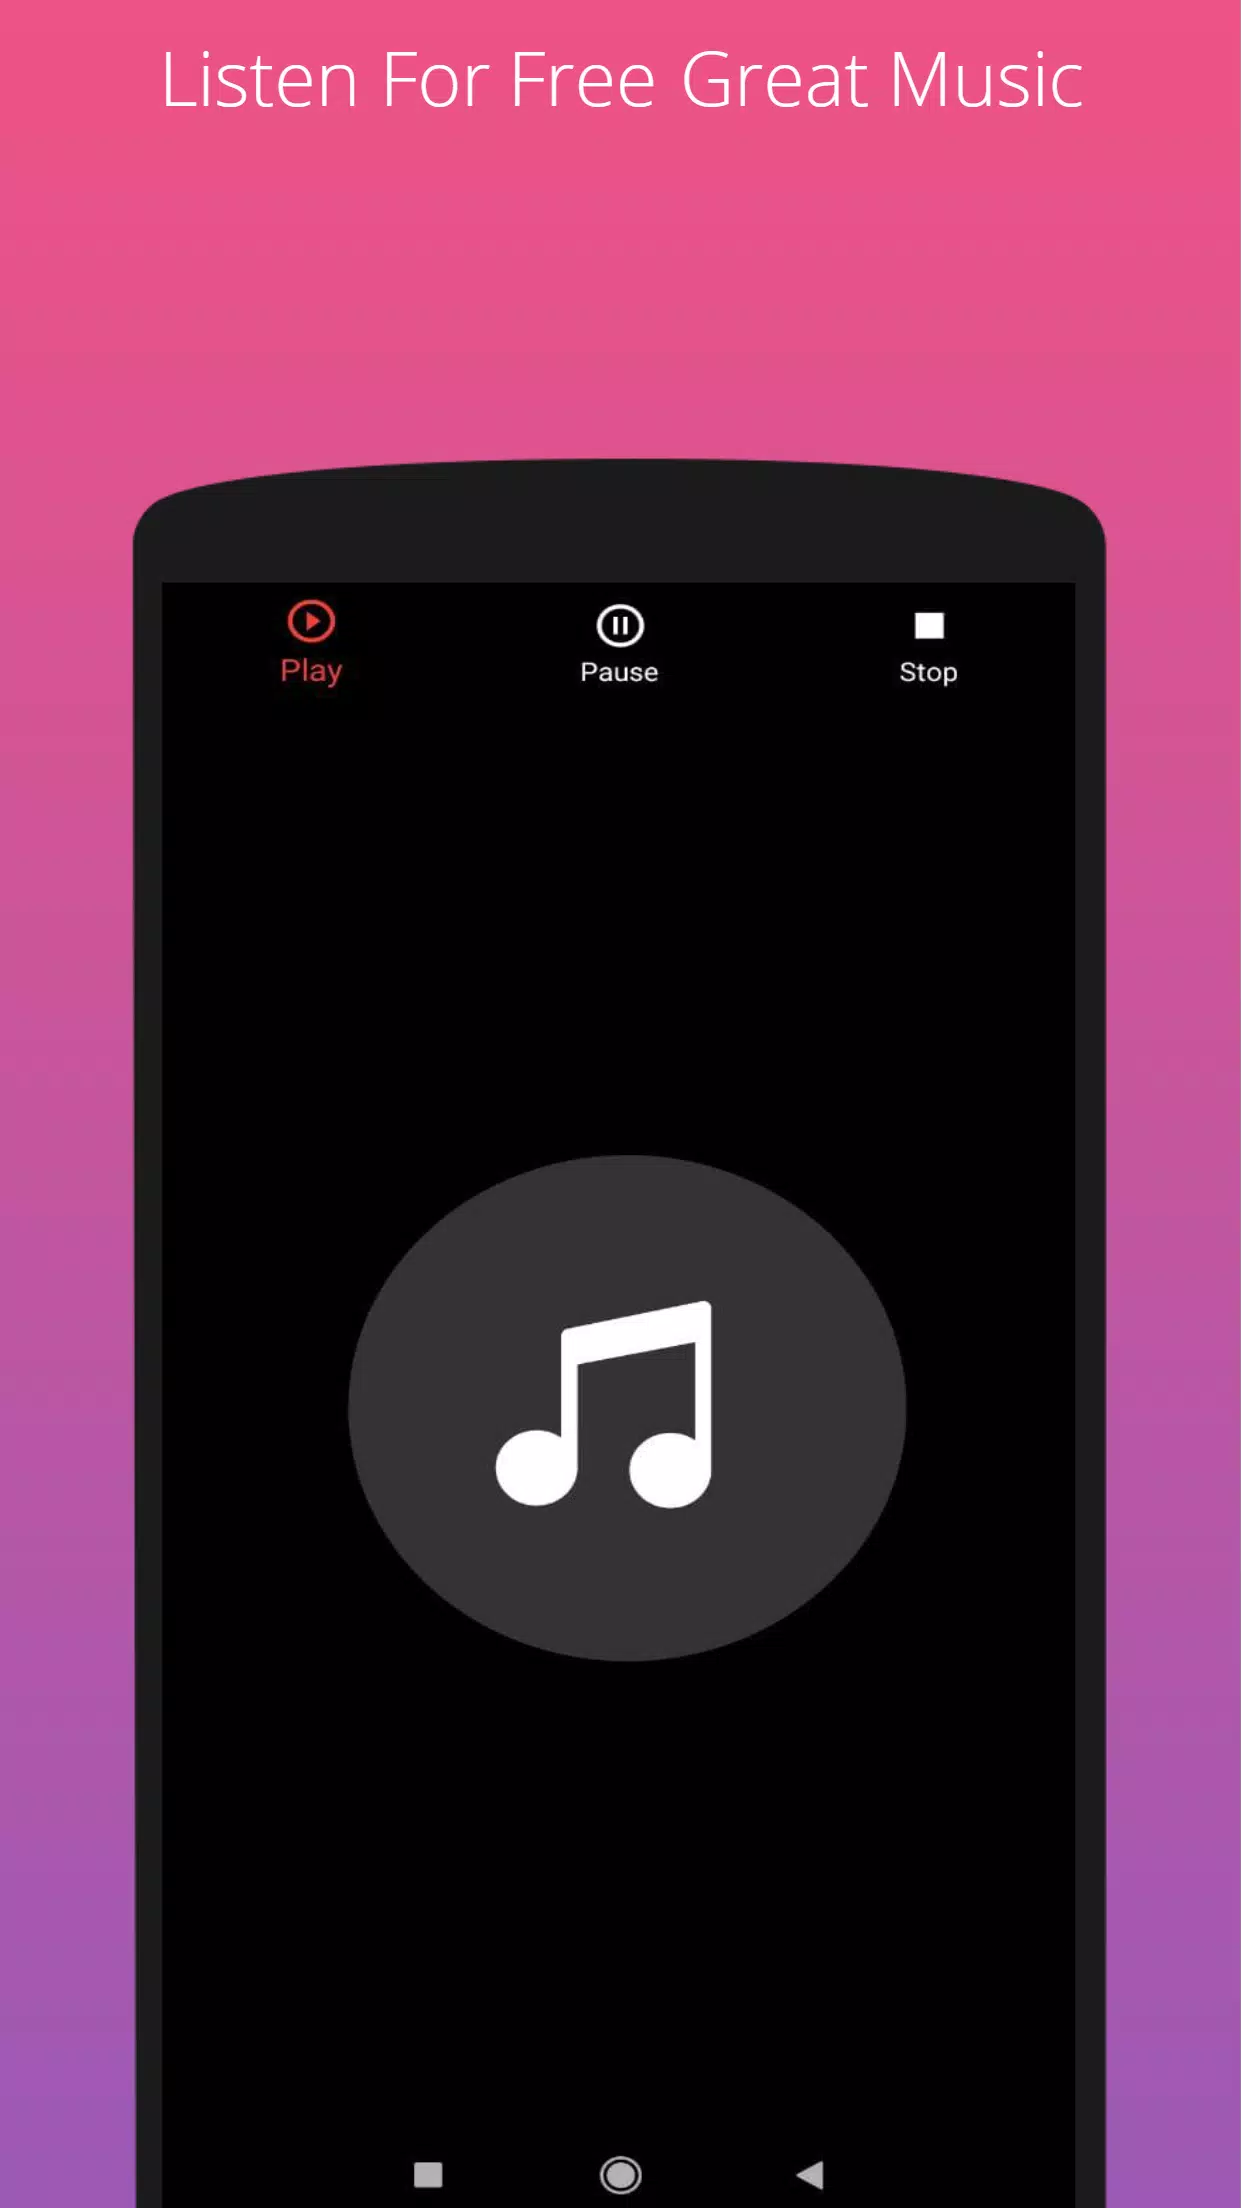 Radio HIT FM Acoustic - Online for Android - APK Download